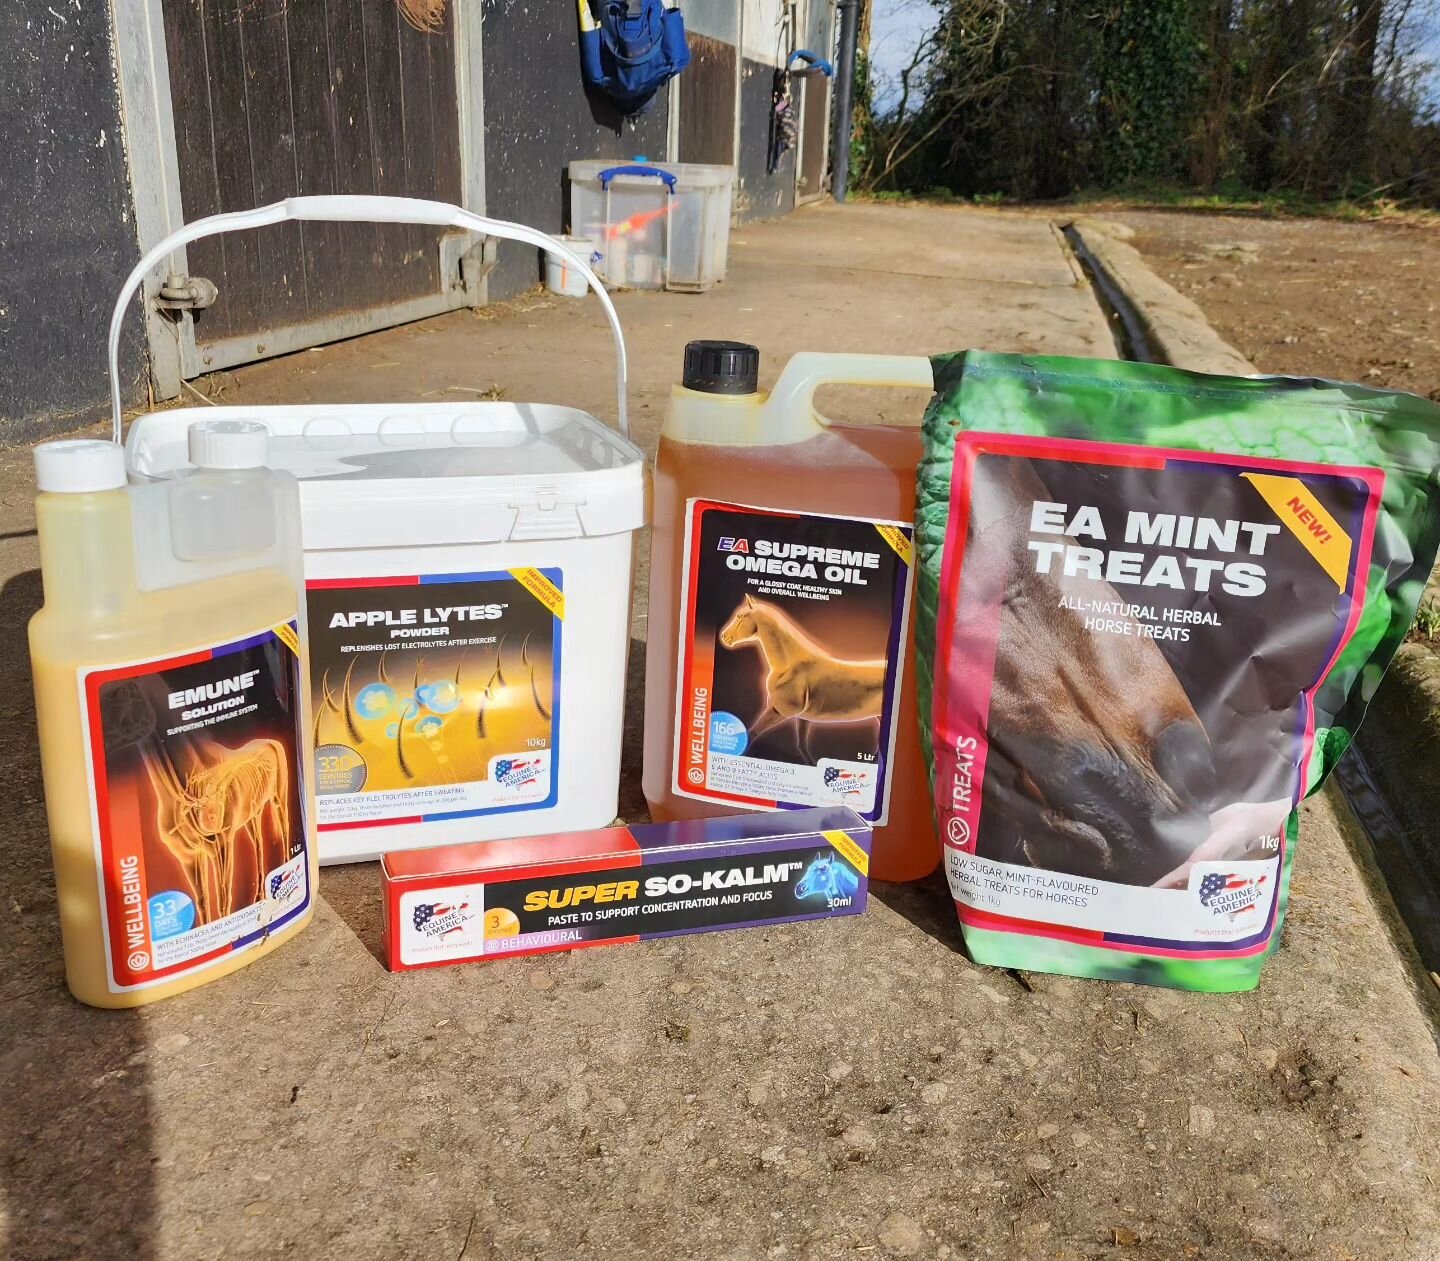 ❔️❓️Why do I use Equine America Supplements 🇺🇸 🦄❓️❔️

Finding Supplements that do what they say they do and are competition safe is a tough mix. With Equine America, I don't have to worry as their supplements are BETA-NOPS accredited. What does th